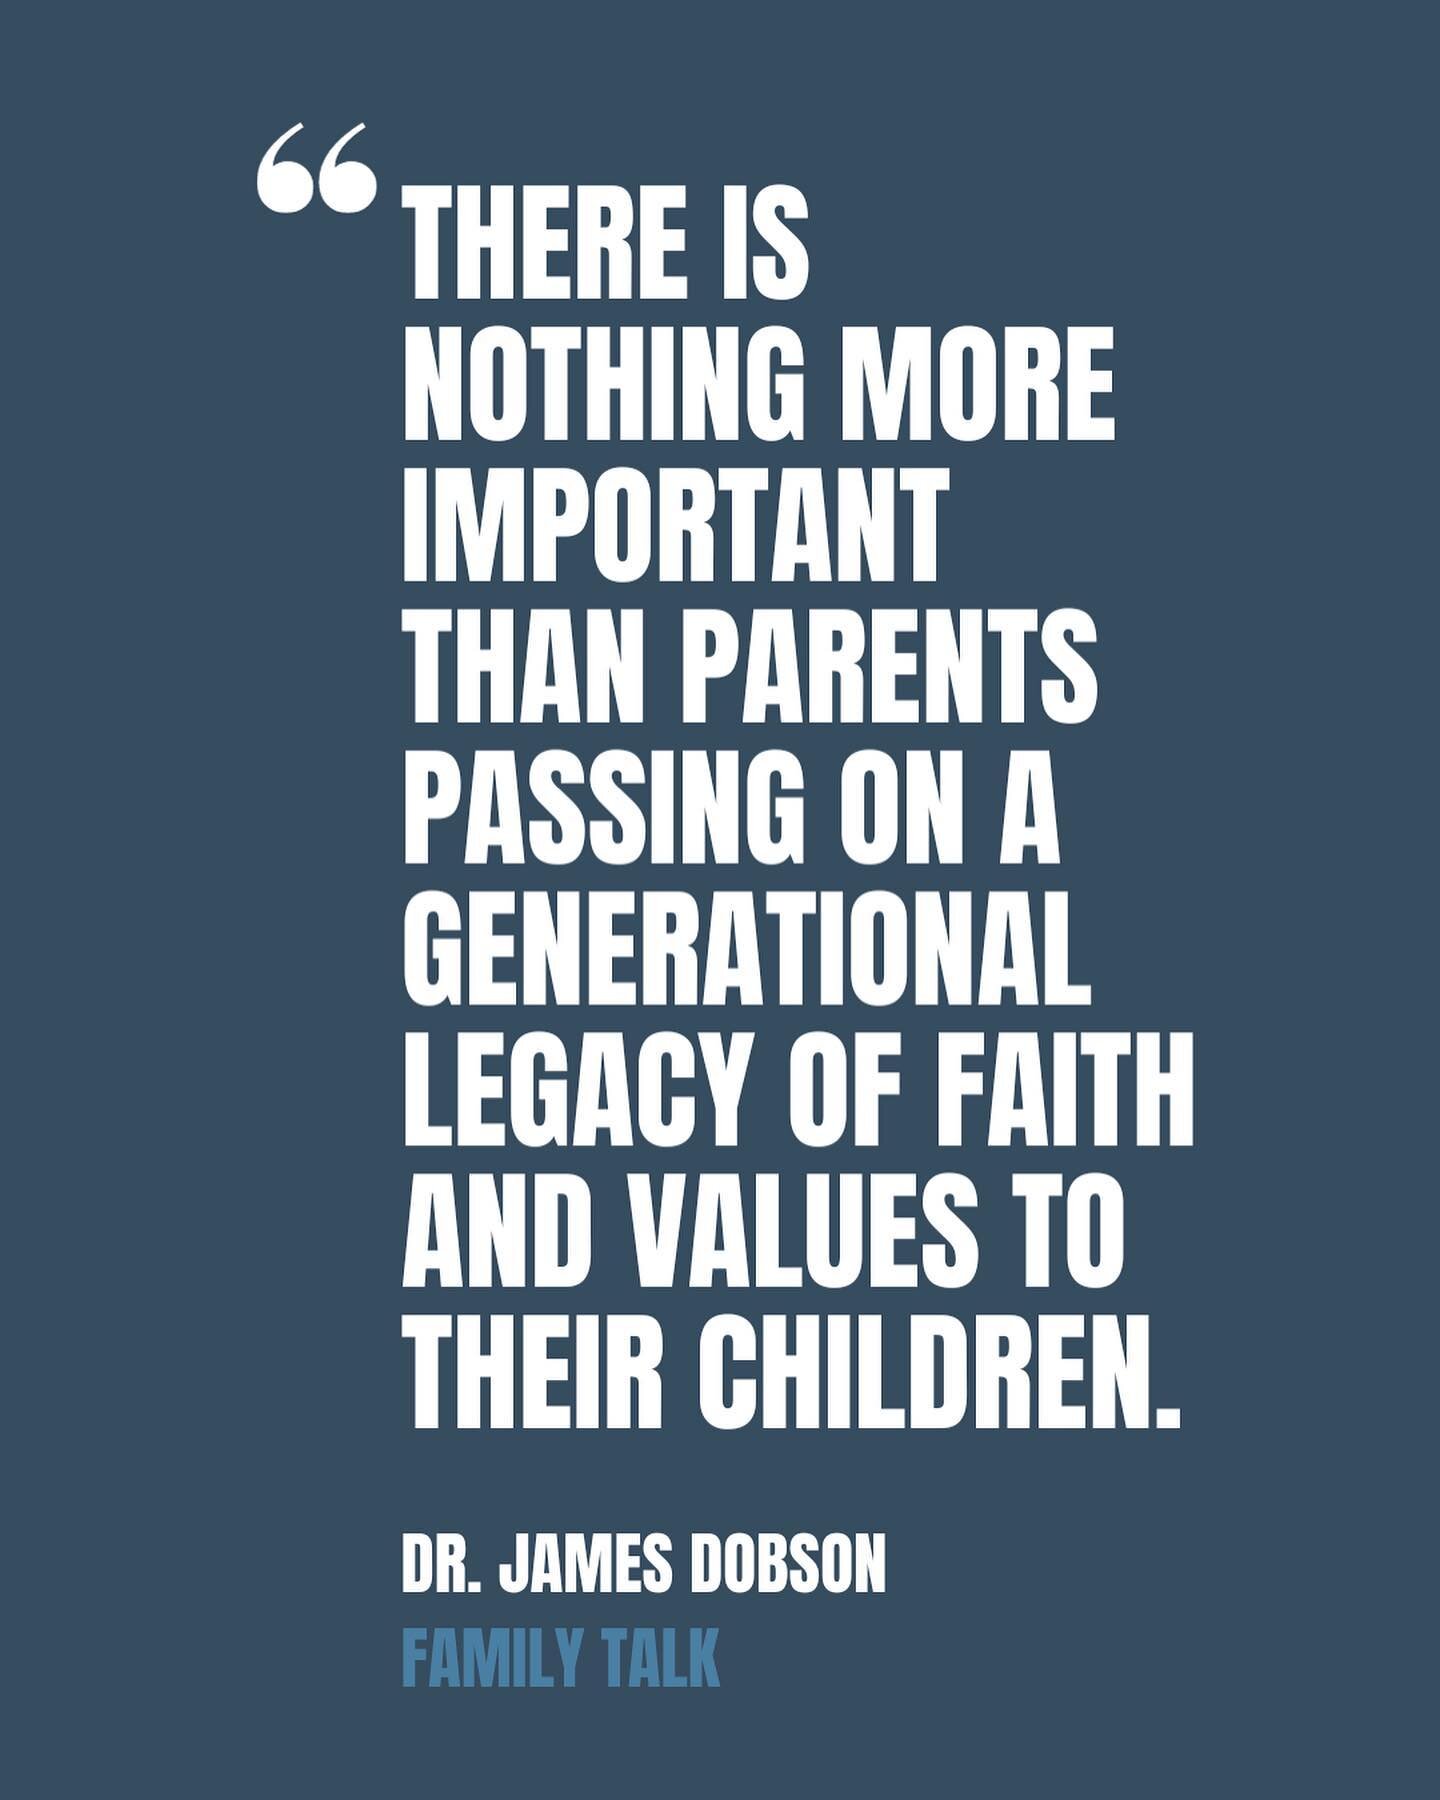 Quote of the day is from Dr. James Dobson from Family Talk. It&rsquo;s all about family! #rkmedia #christianmedia #familytalk